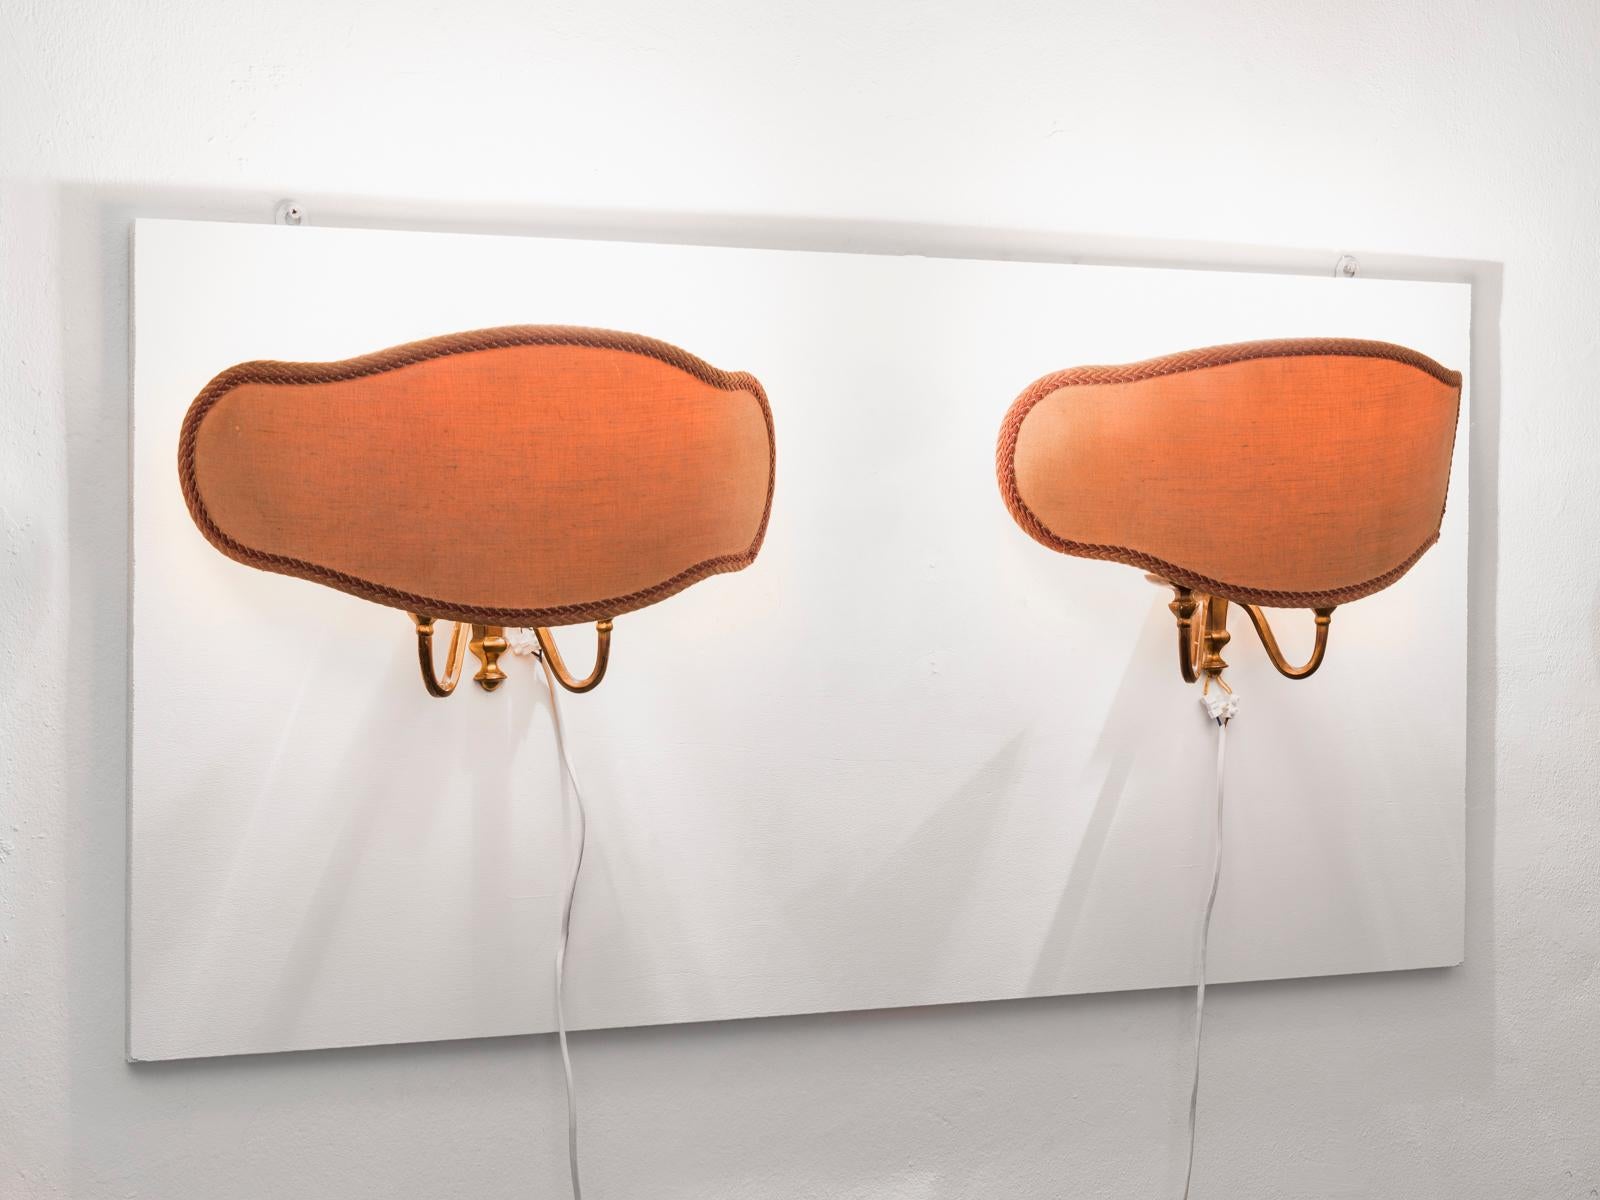 Italian Bruno Chiarini Pair of Large Mid-Century Brass and Parchment Wall Sconces, 1950s